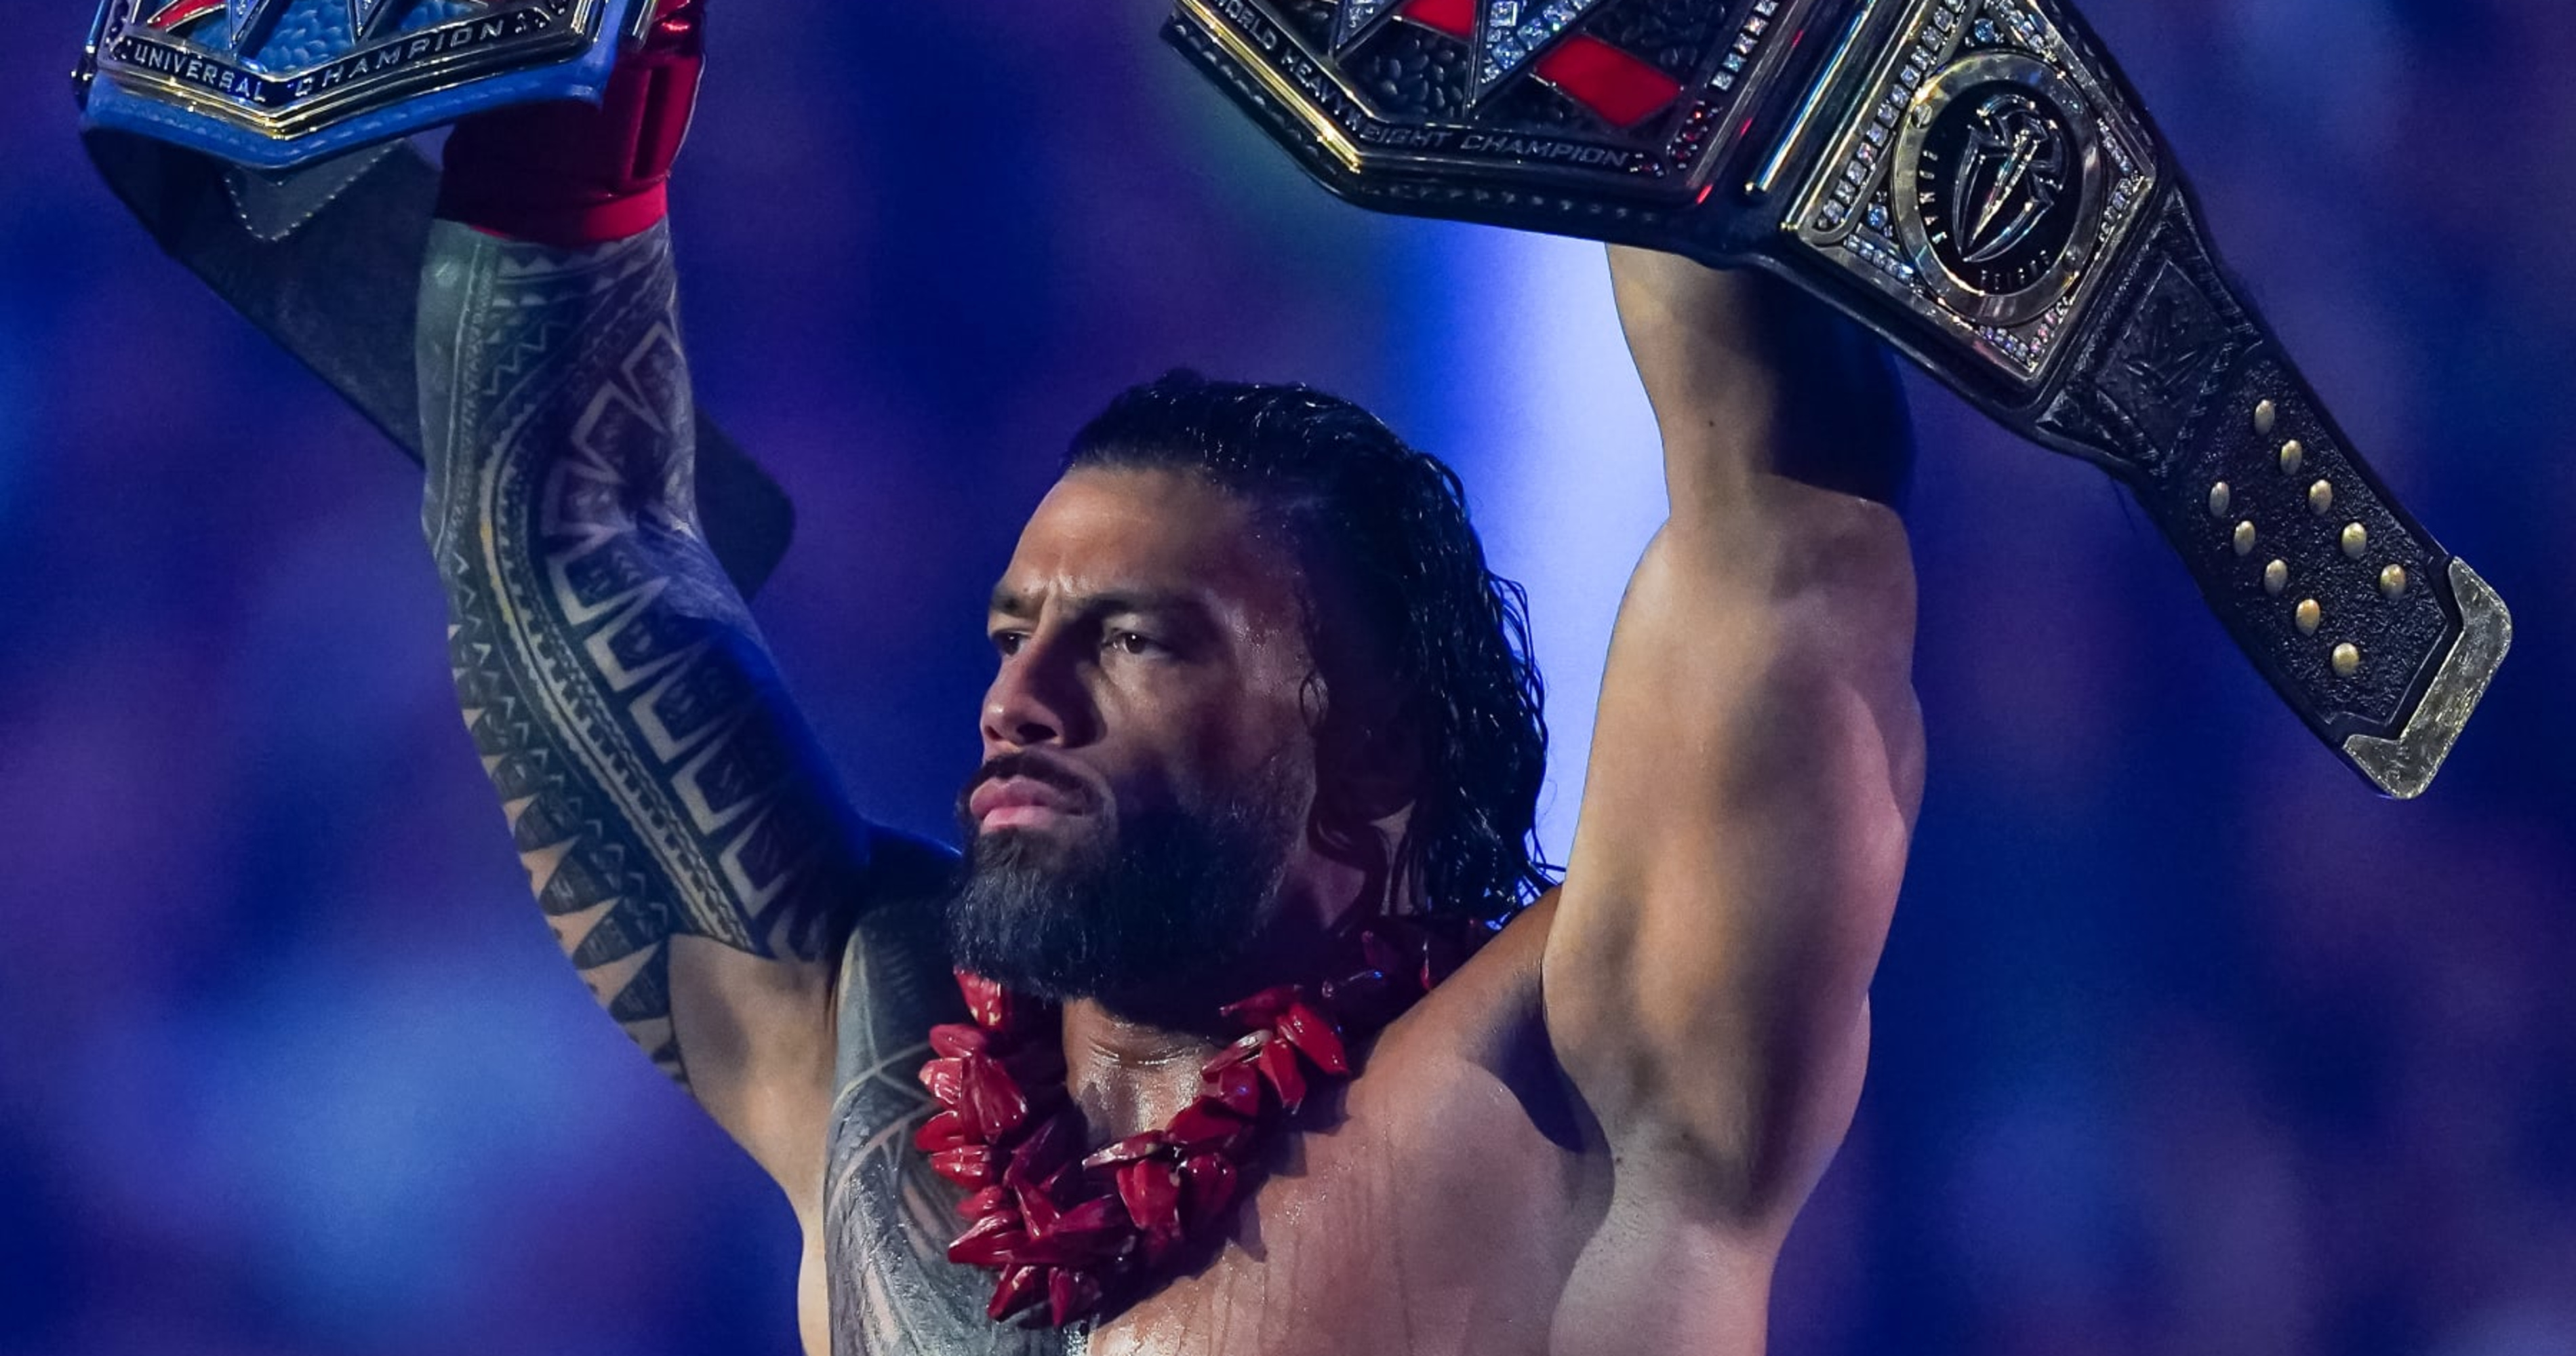 Backstage WWE Rumors: Latest on Roman Reigns, Randy Orton and More